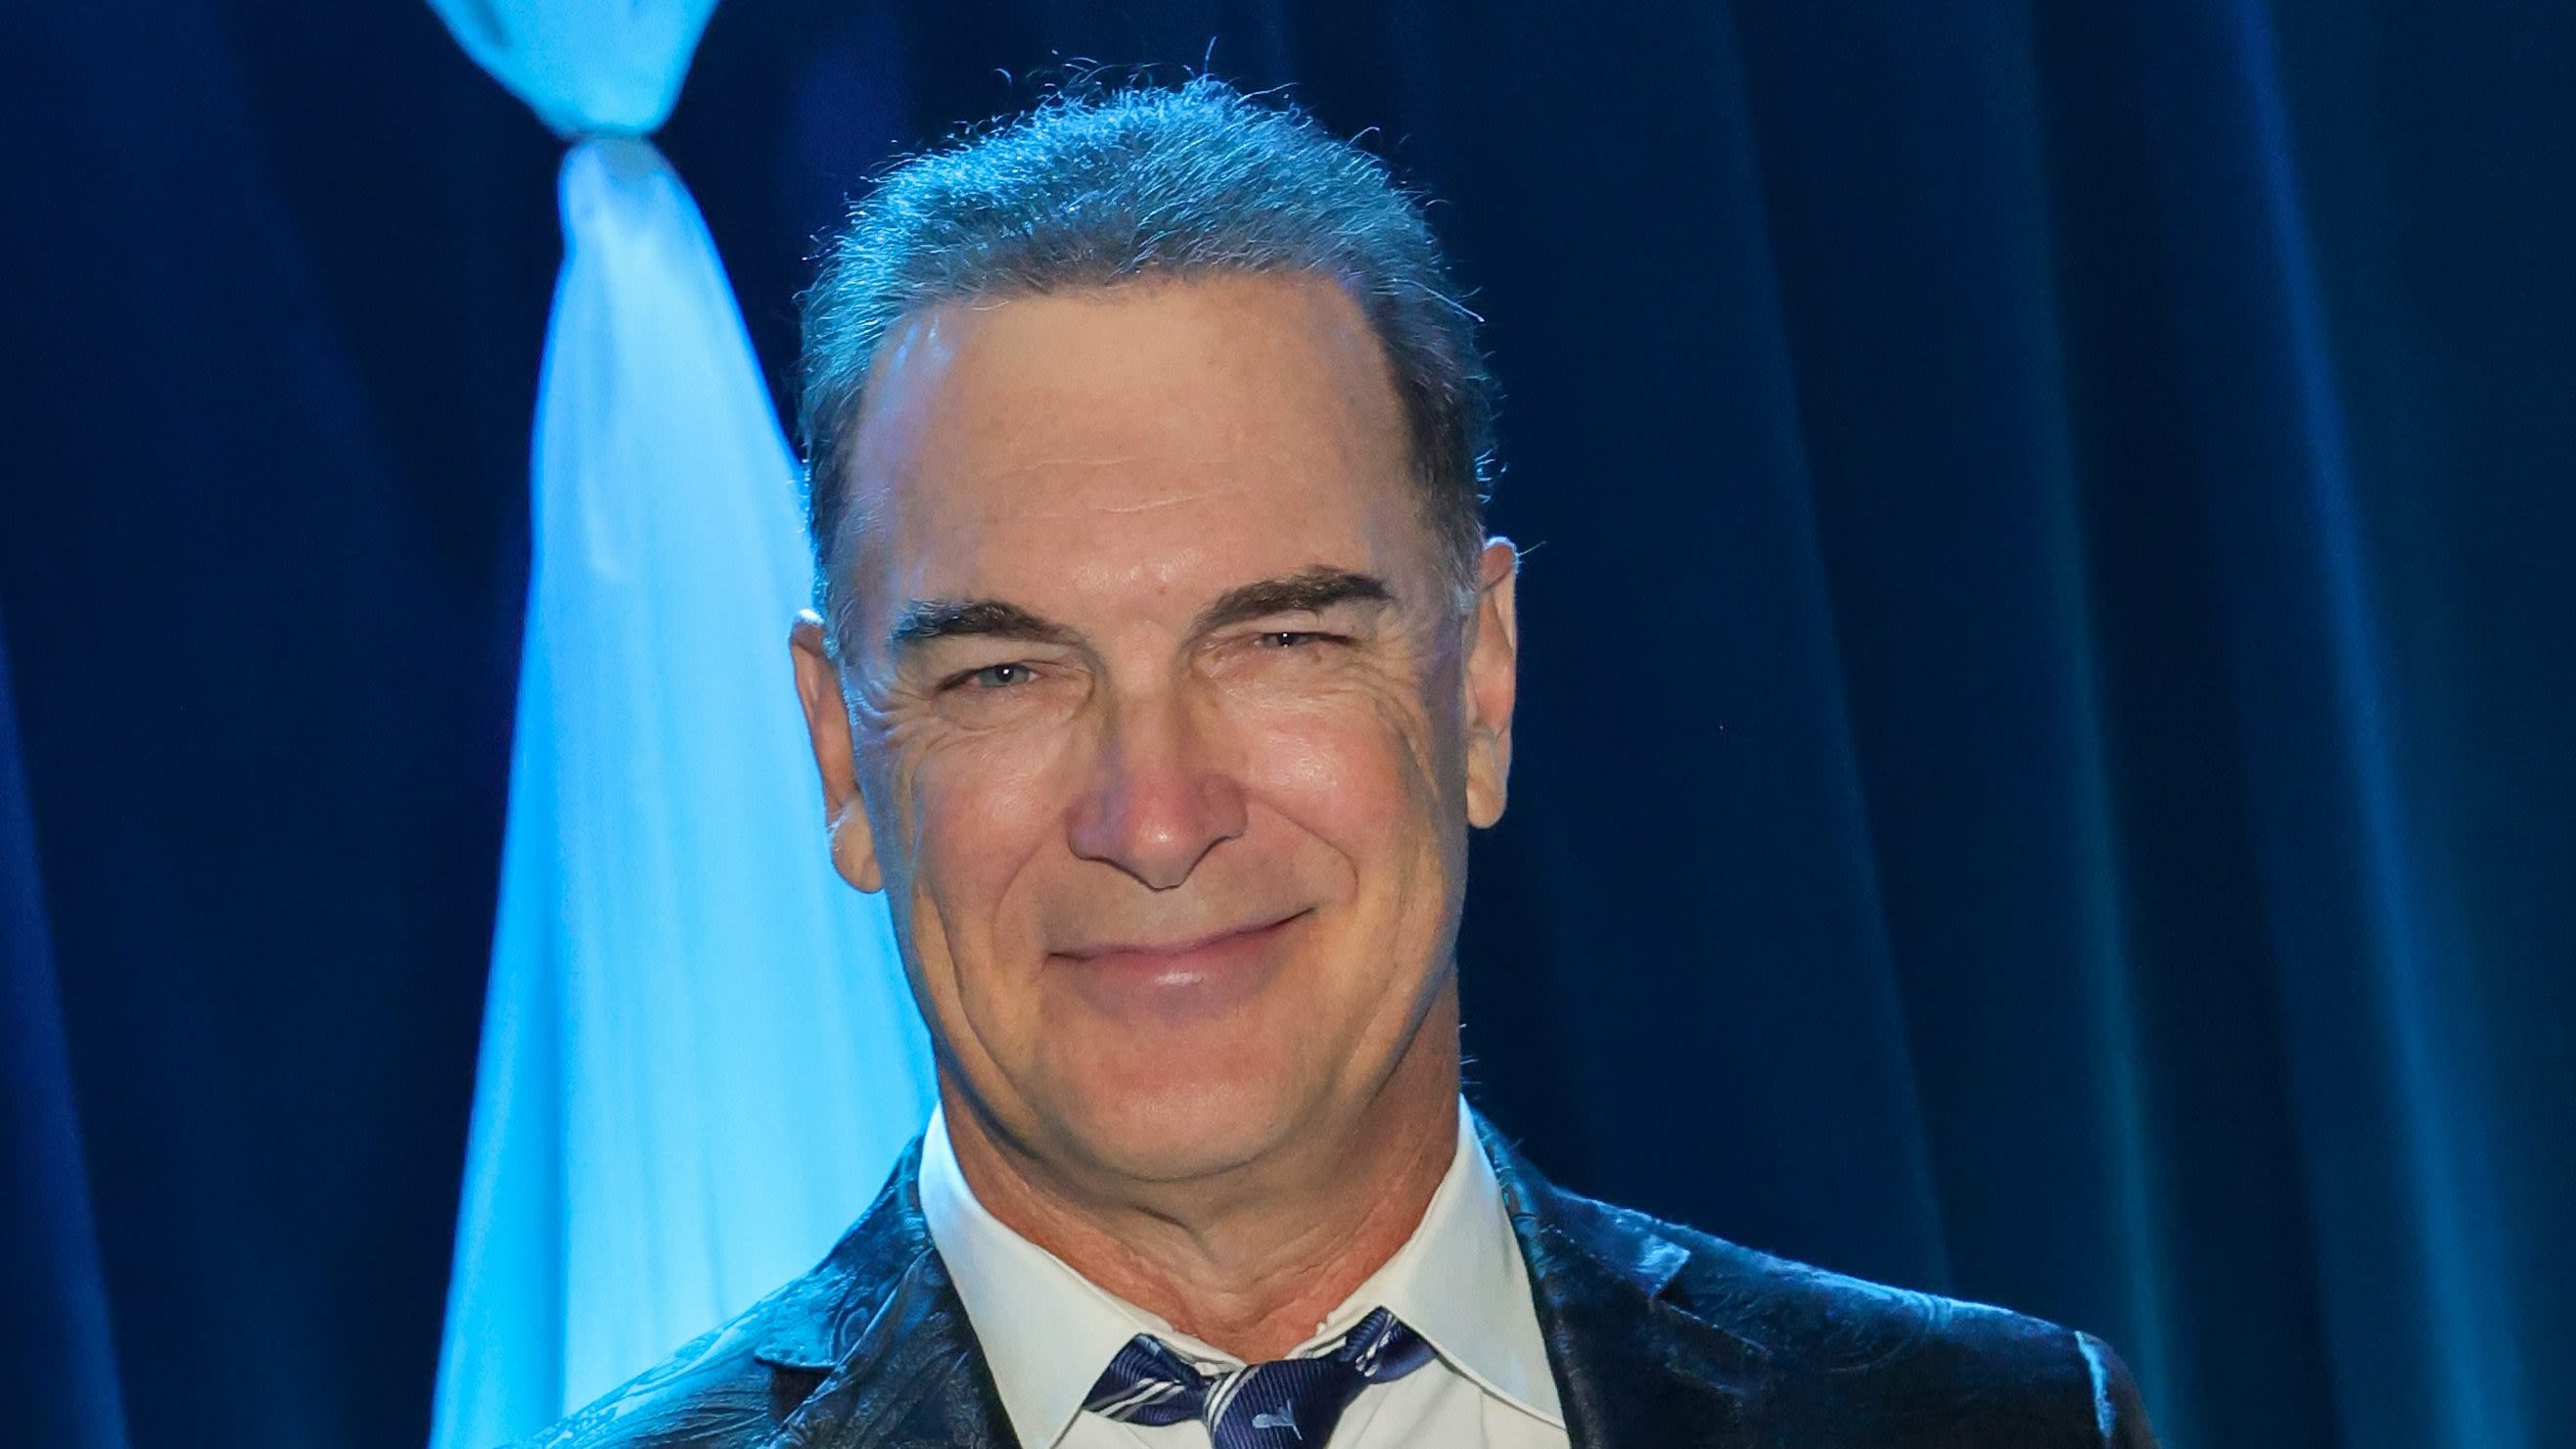 Patrick Warburton To Co-Host Pilot For Movie Memorabilia Docuseries Based On Feature Doc ‘Mad Props’